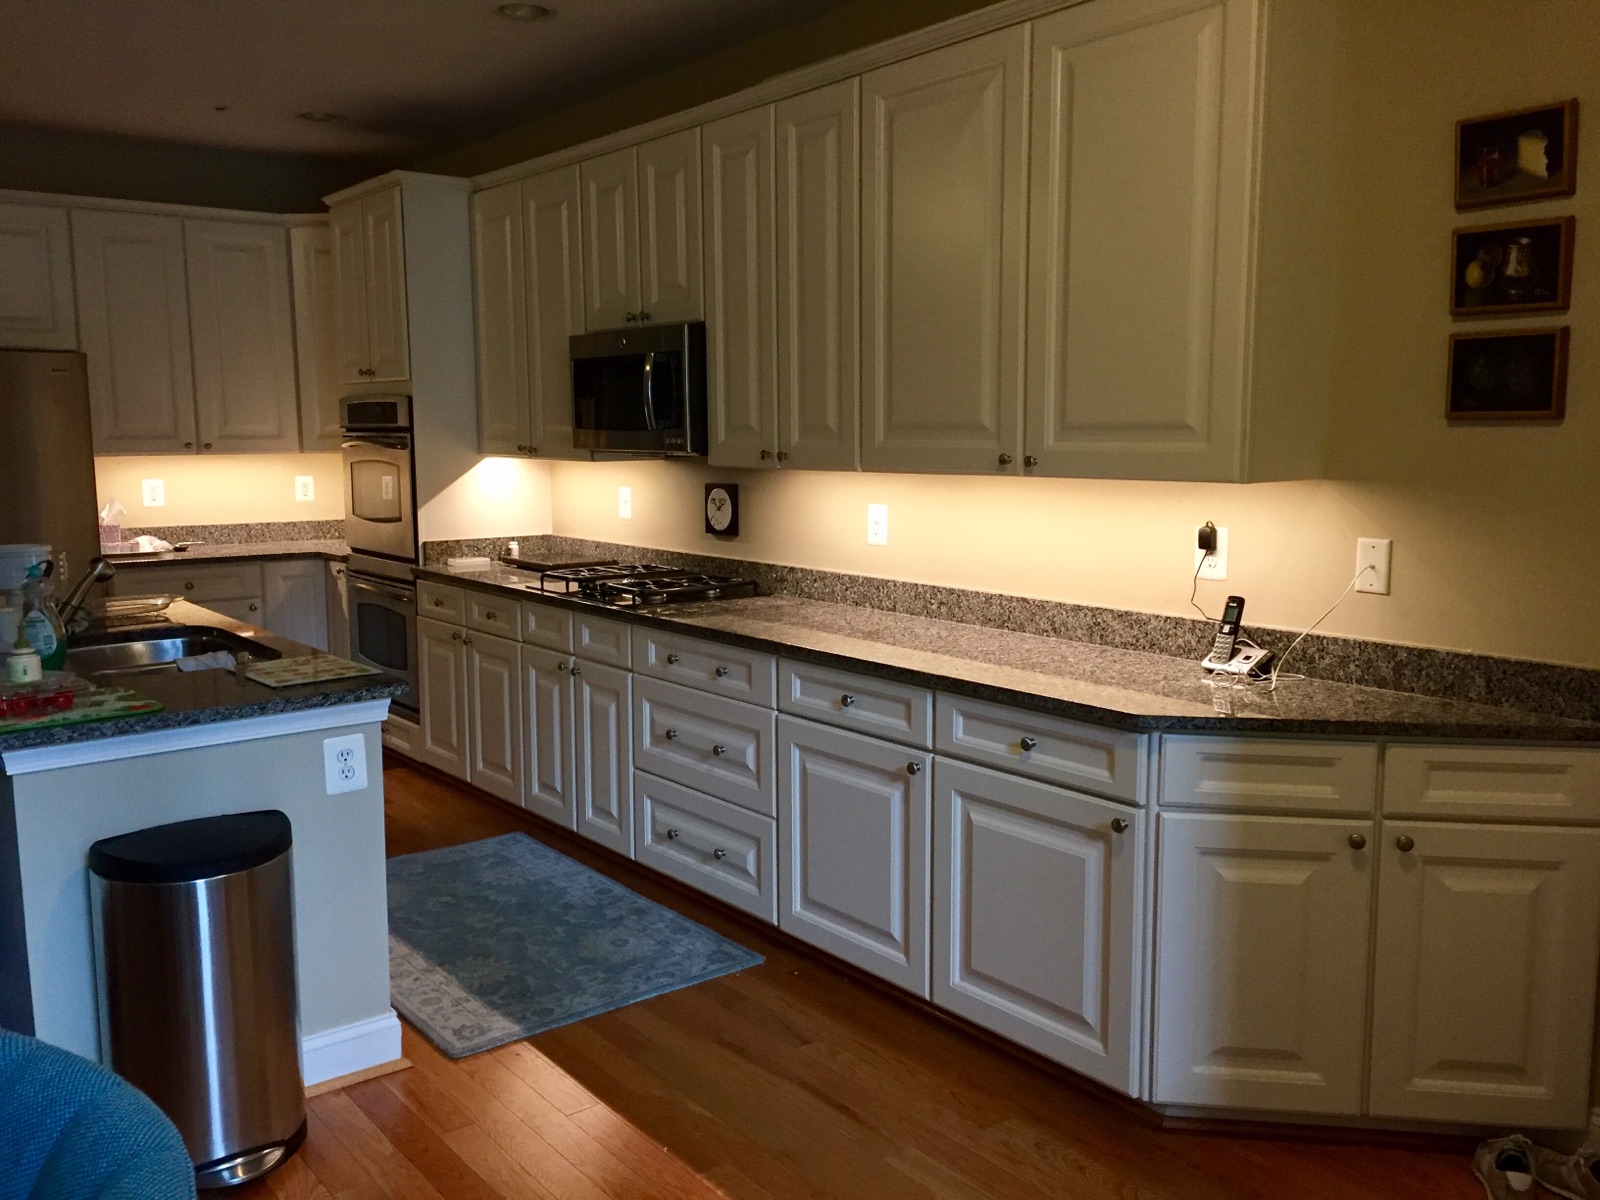 Four Reasons Your Kitchen Needs Under-Cabinet Lighting